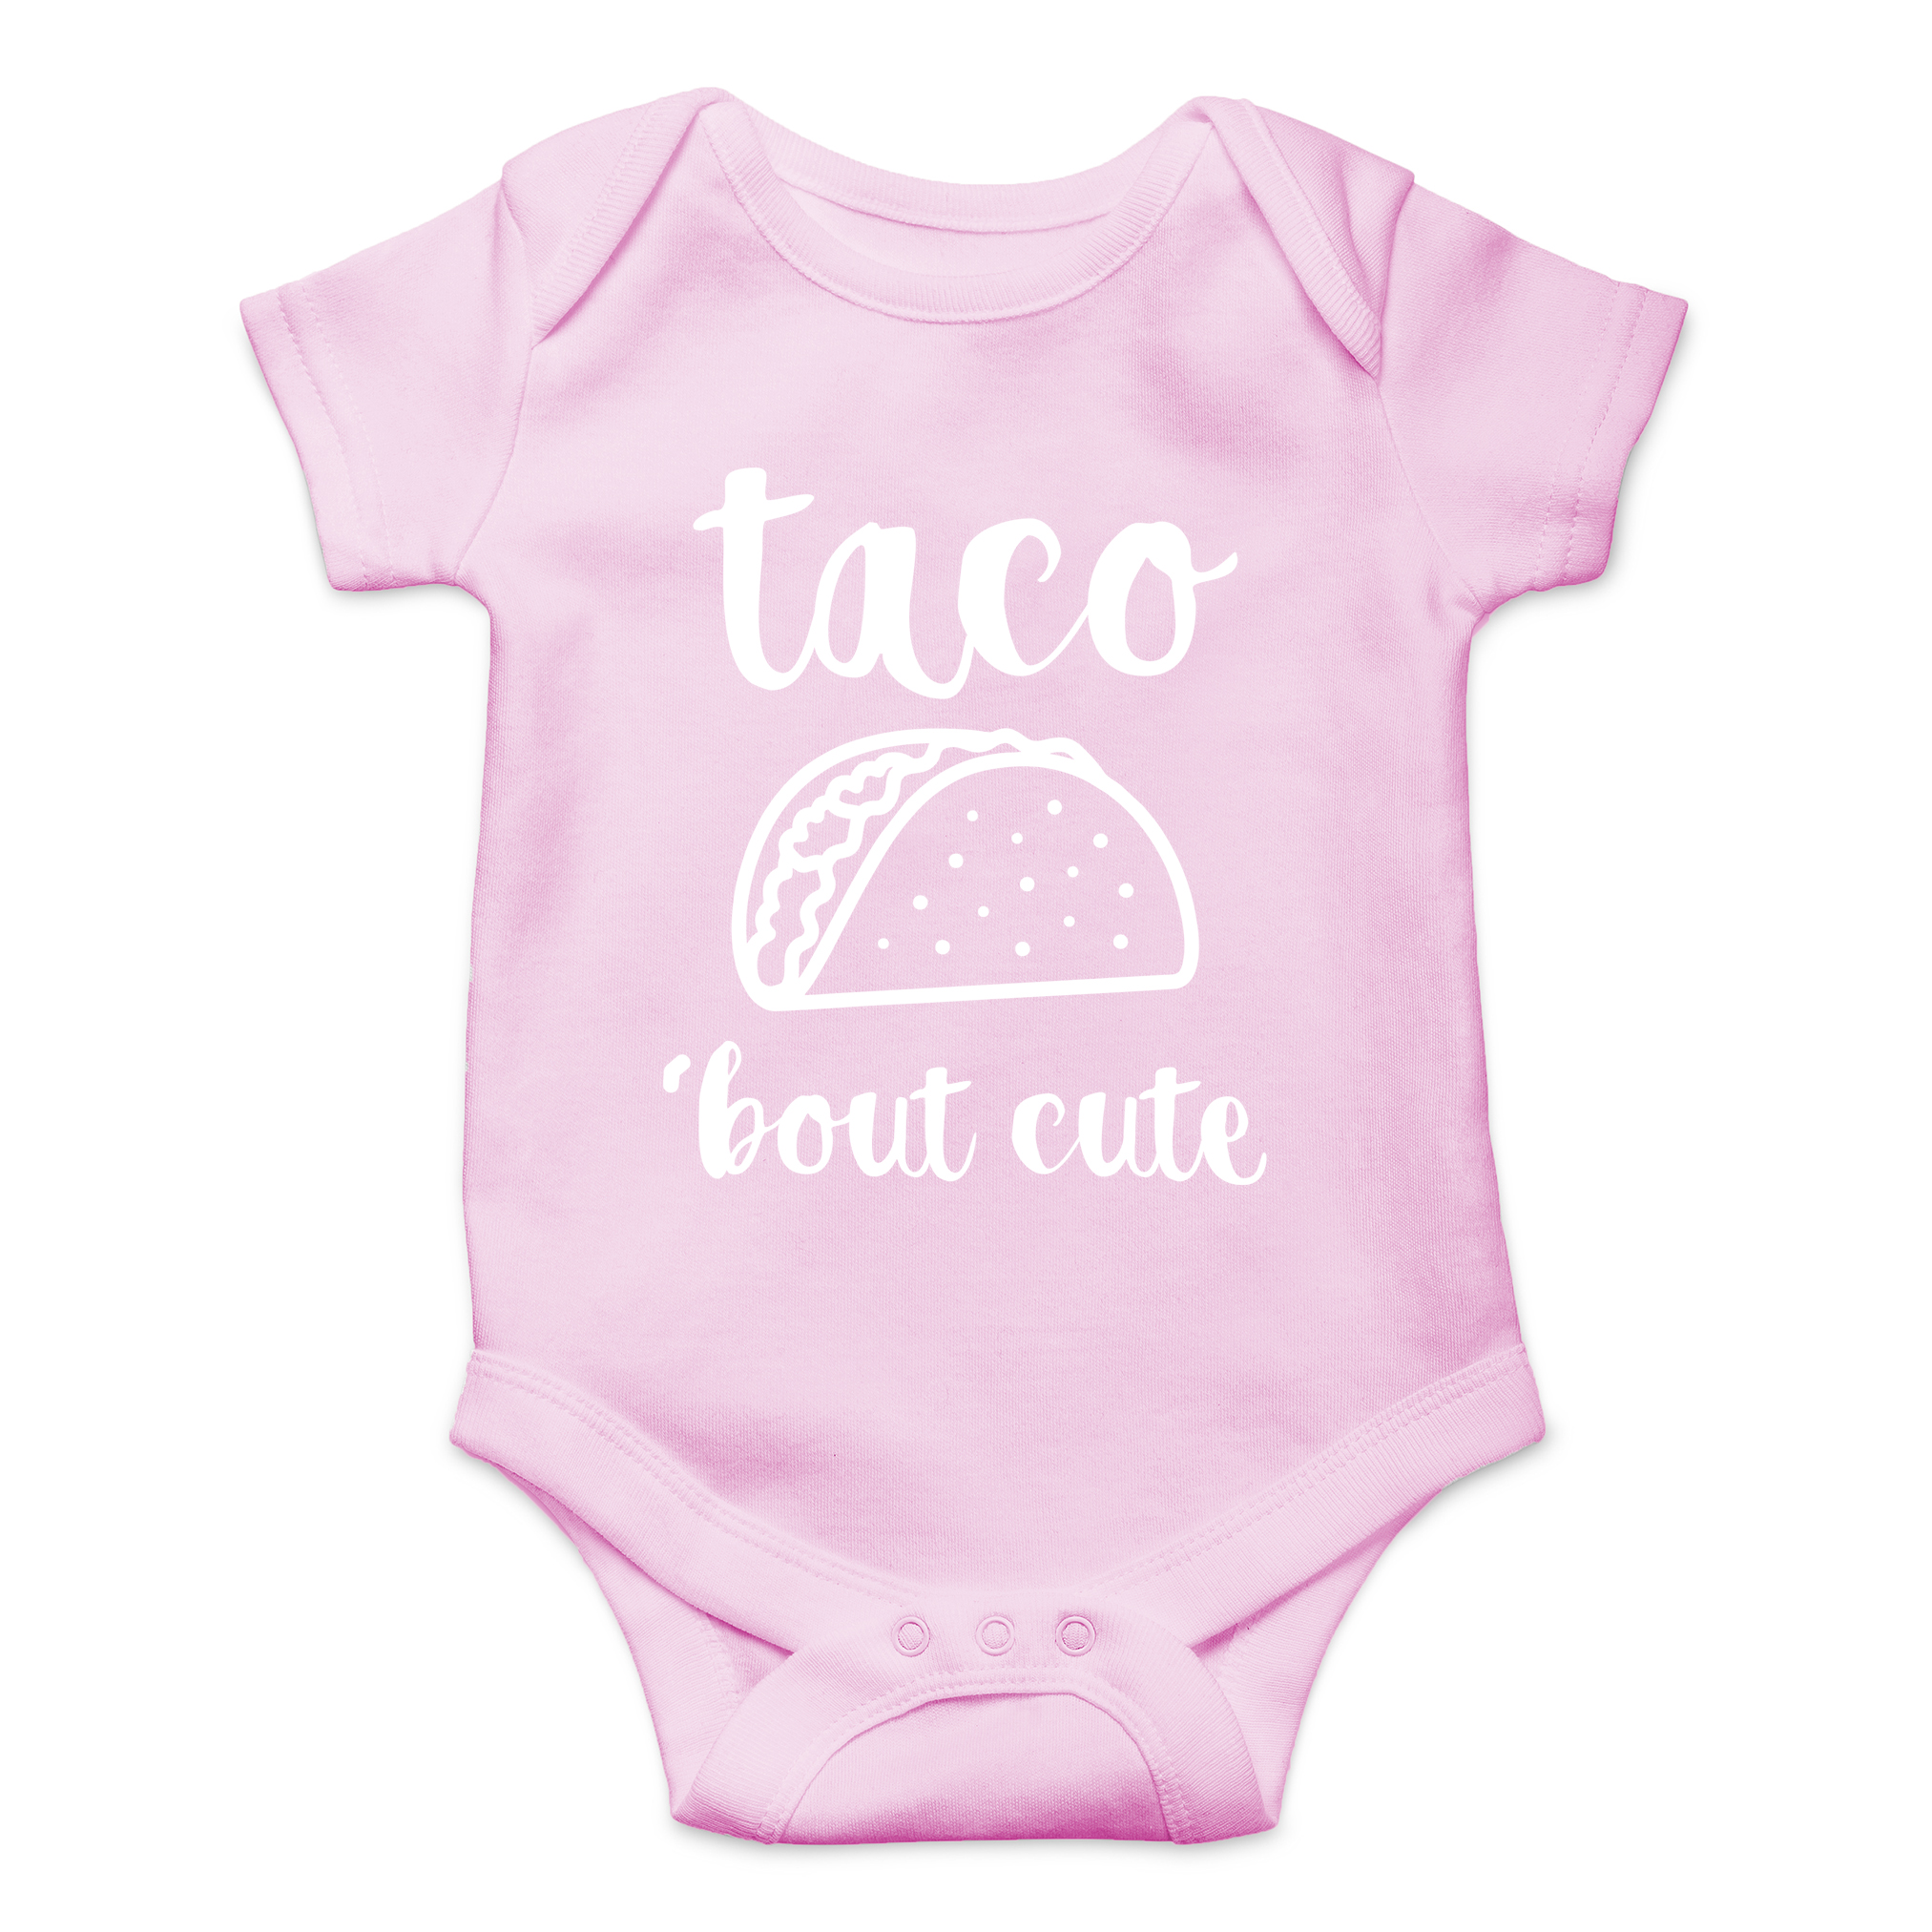 Taco 'Bout Cute - Funny Lil Adorable Tacos Mexican Food Lover - Cute One-Piece Infant Baby Bodysuit - image 1 of 4